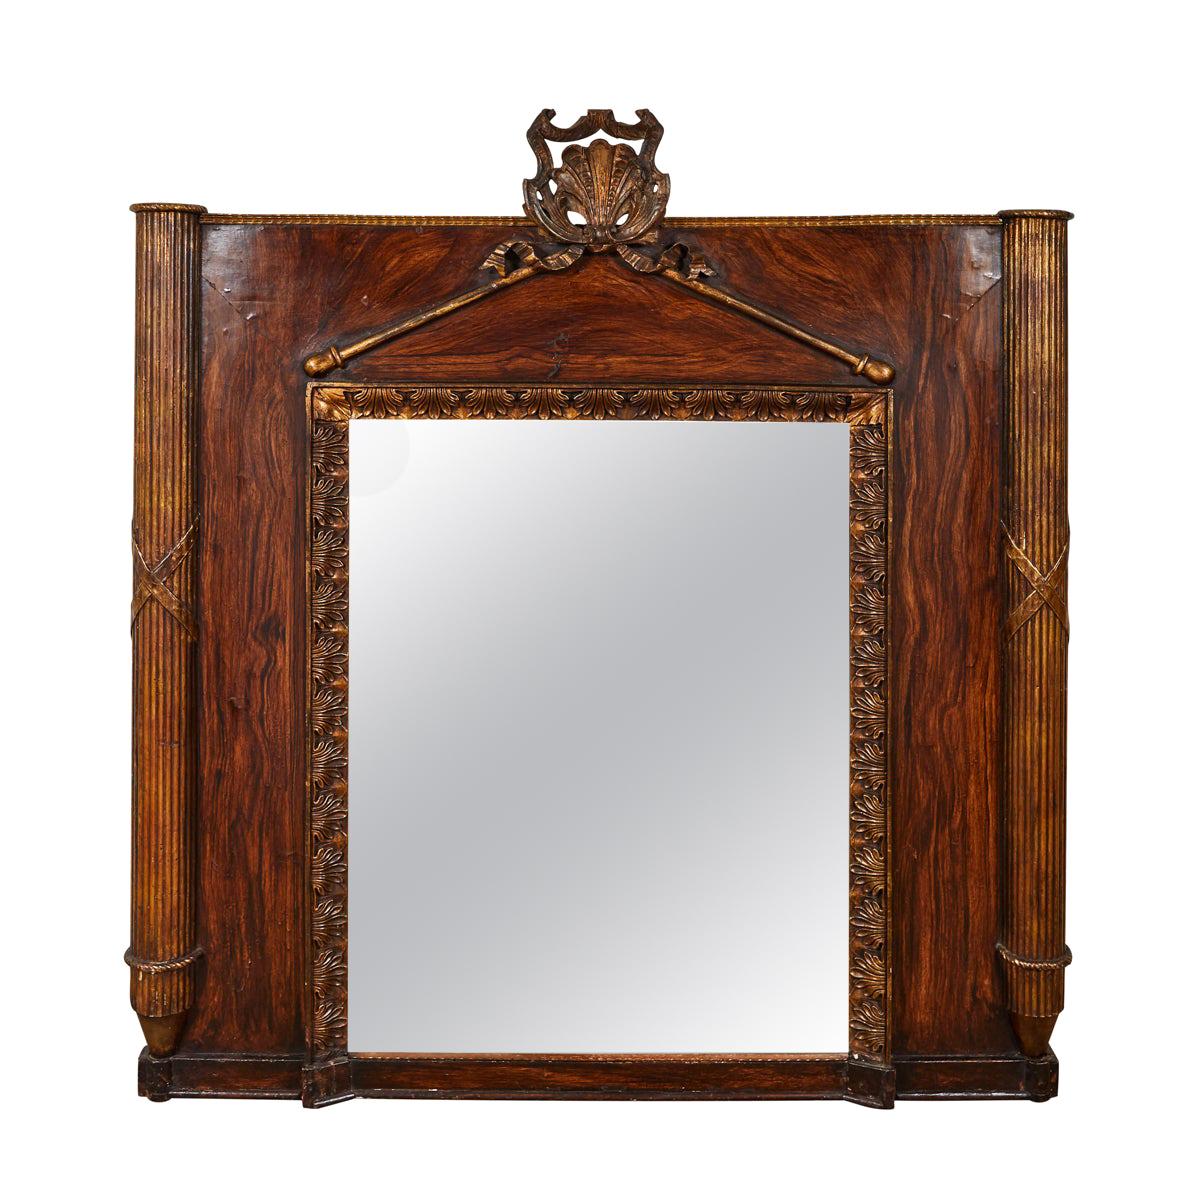 Carved Giltwood and Faux Bois Painted Mirror from Early 19th Century, France